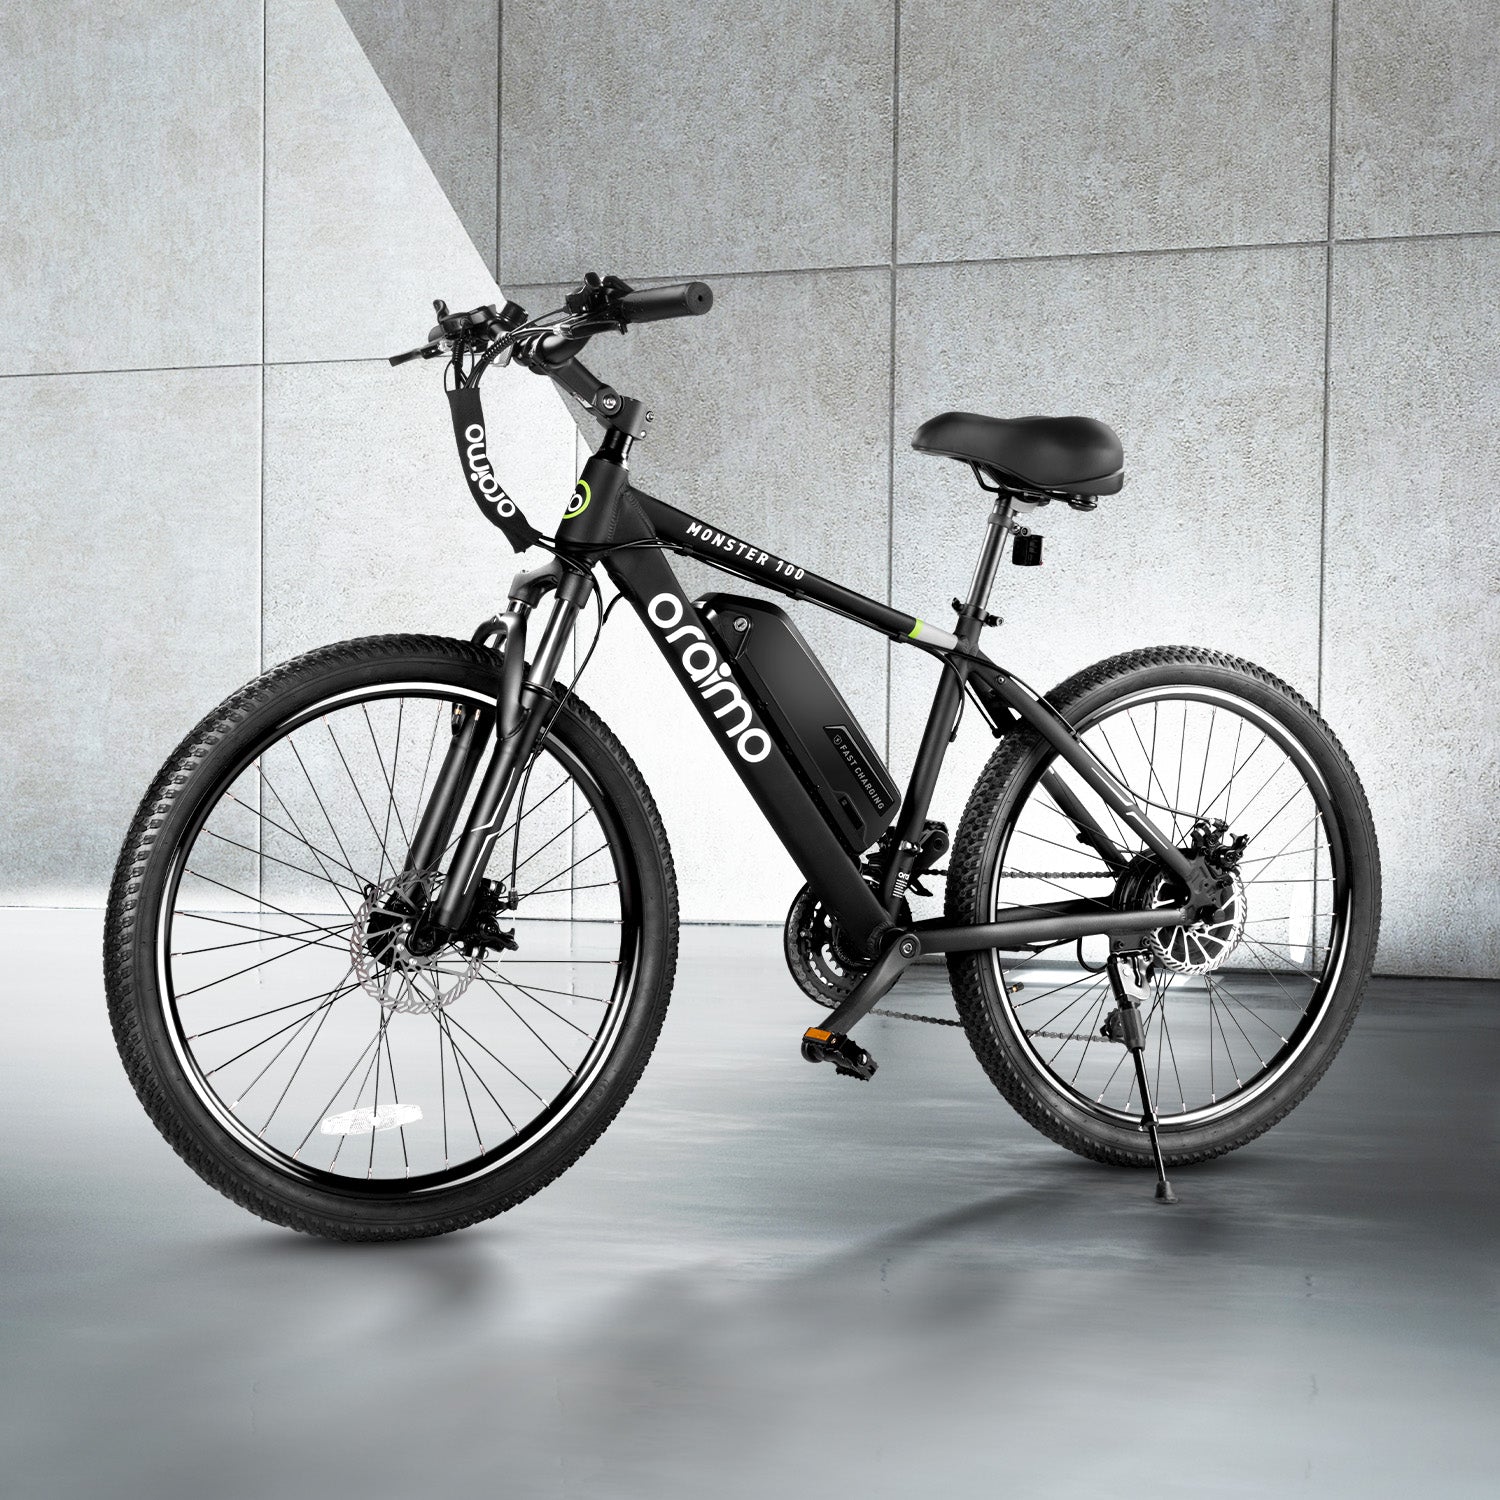 Oraimo Electric Bike for Adults,350W BAFANG Motor(Peak 500W), 4A 3H Fast  Charge, 468Wh Li-ion Battery, 21 Speed Gear, Air Saddle, 45 Miles 20 MPH  26